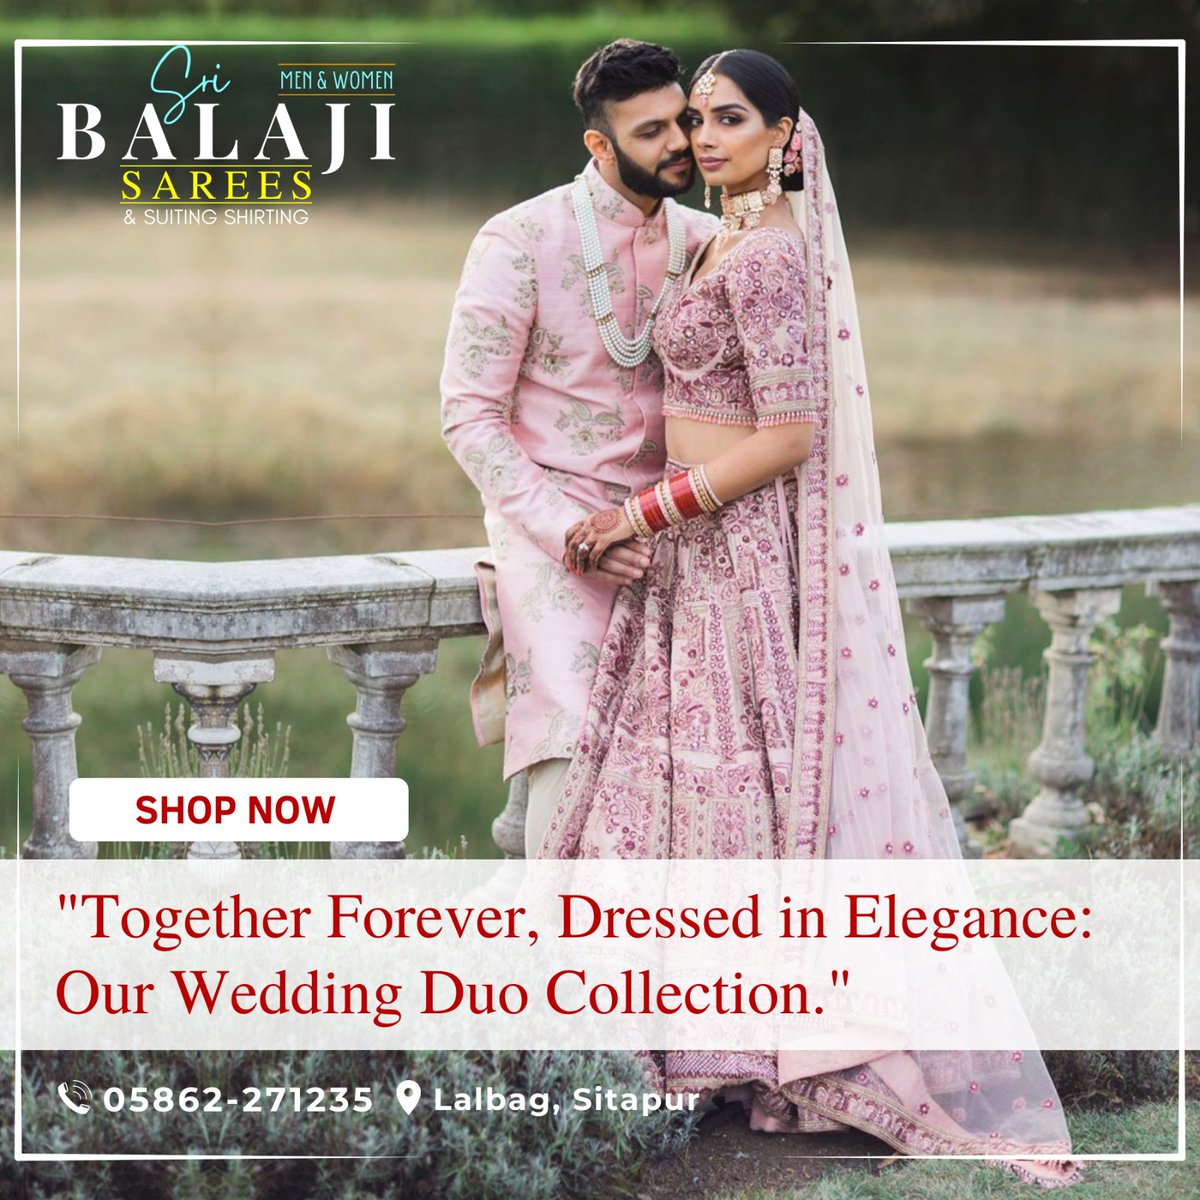 Together Forever, Dressed in Elegance : Our Wedding Due Collection💑
👉Shop Now
Sri Balaji Sarees
Address :- Lalbag, Sitapur
Contact No. :- 05862-271235
.
#indianfashion #Ethnicwear #weddingwear #weddingcollection #weddingday #lehengas🥳 #sherwani #ethniclook #balaji #sitapur